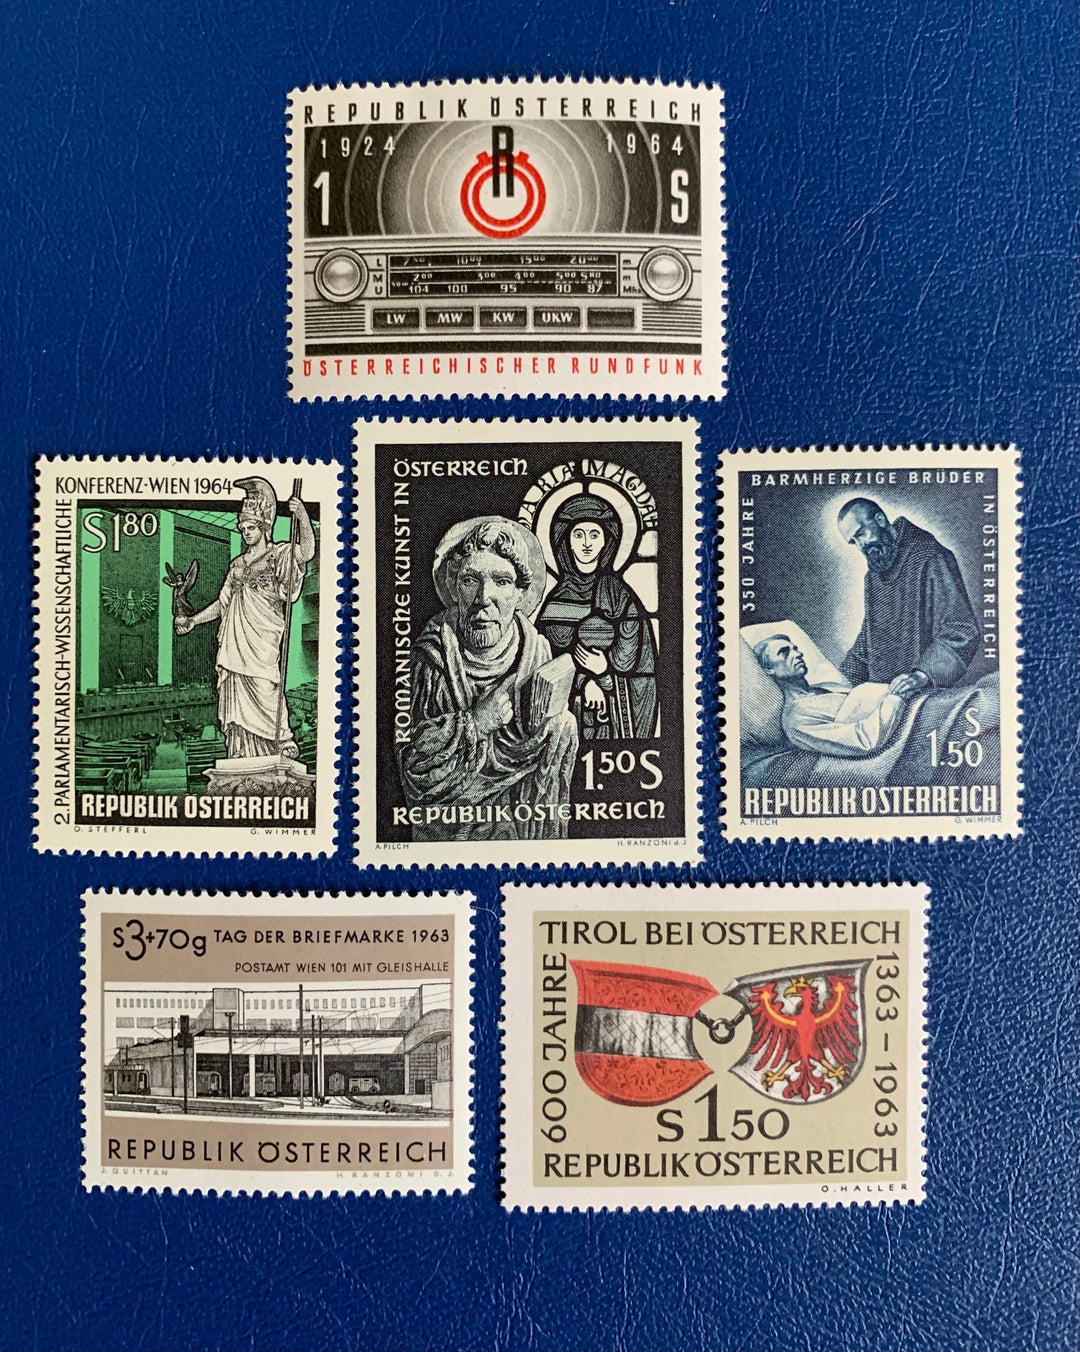 Austria - Original Vintage Postage Stamps - 1965 Mix - for the collector, artist or crafter - scrapbooks, decoupage